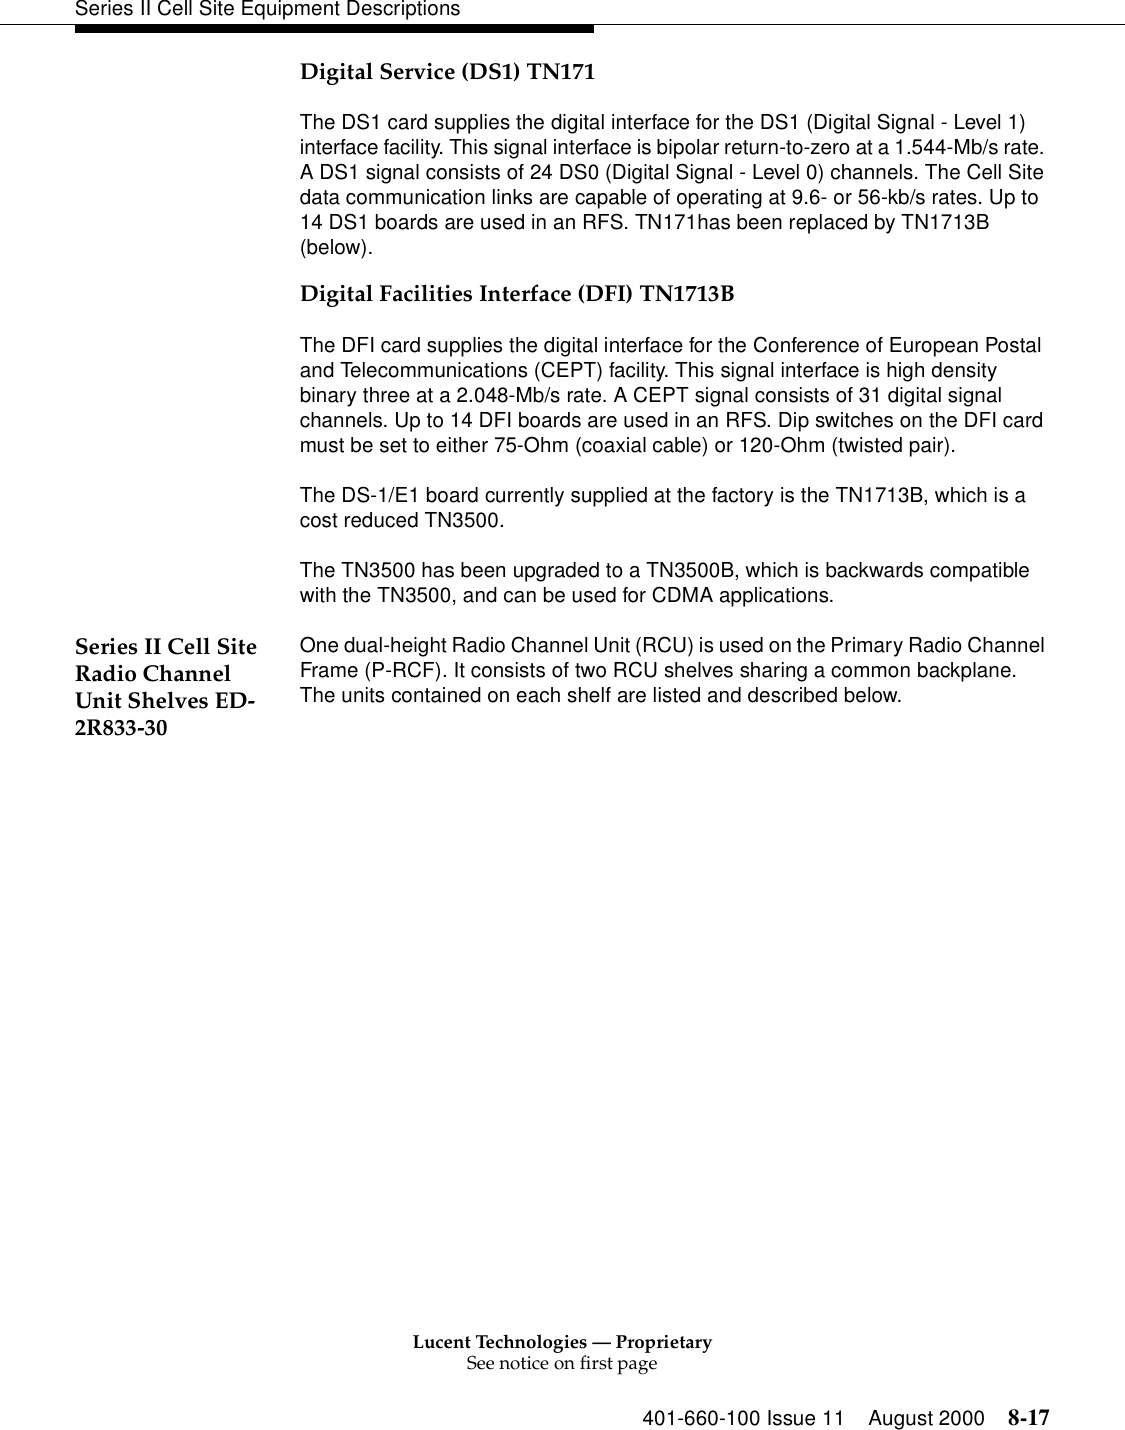 Lucent Technologies — ProprietarySee notice on first page401-660-100 Issue 11 August 2000 8-17Series II Cell Site Equipment DescriptionsDigital Service (DS1) TN171The DS1 card supplies the digital interface for the DS1 (Digital Signal - Level 1) interface facility. This signal interface is bipolar return-to-zero at a 1.544-Mb/s rate. A DS1 signal consists of 24 DS0 (Digital Signal - Level 0) channels. The Cell Site data communication links are capable of operating at 9.6- or 56-kb/s rates. Up to 14 DS1 boards are used in an RFS. TN171has been replaced by TN1713B (below).Digital Facilities Interface (DFI) TN1713BThe DFI card supplies the digital interface for the Conference of European Postal and Telecommunications (CEPT) facility. This signal interface is high density binary three at a 2.048-Mb/s rate. A CEPT signal consists of 31 digital signal channels. Up to 14 DFI boards are used in an RFS. Dip switches on the DFI card must be set to either 75-Ohm (coaxial cable) or 120-Ohm (twisted pair). The DS-1/E1 board currently supplied at the factory is the TN1713B, which is a cost reduced TN3500.The TN3500 has been upgraded to a TN3500B, which is backwards compatible with the TN3500, and can be used for CDMA applications.Series II Cell Site Radio Channel Unit Shelves ED-2R833-30One dual-height Radio Channel Unit (RCU) is used on the Primary Radio Channel Frame (P-RCF). It consists of two RCU shelves sharing a common backplane. The units contained on each shelf are listed and described below.